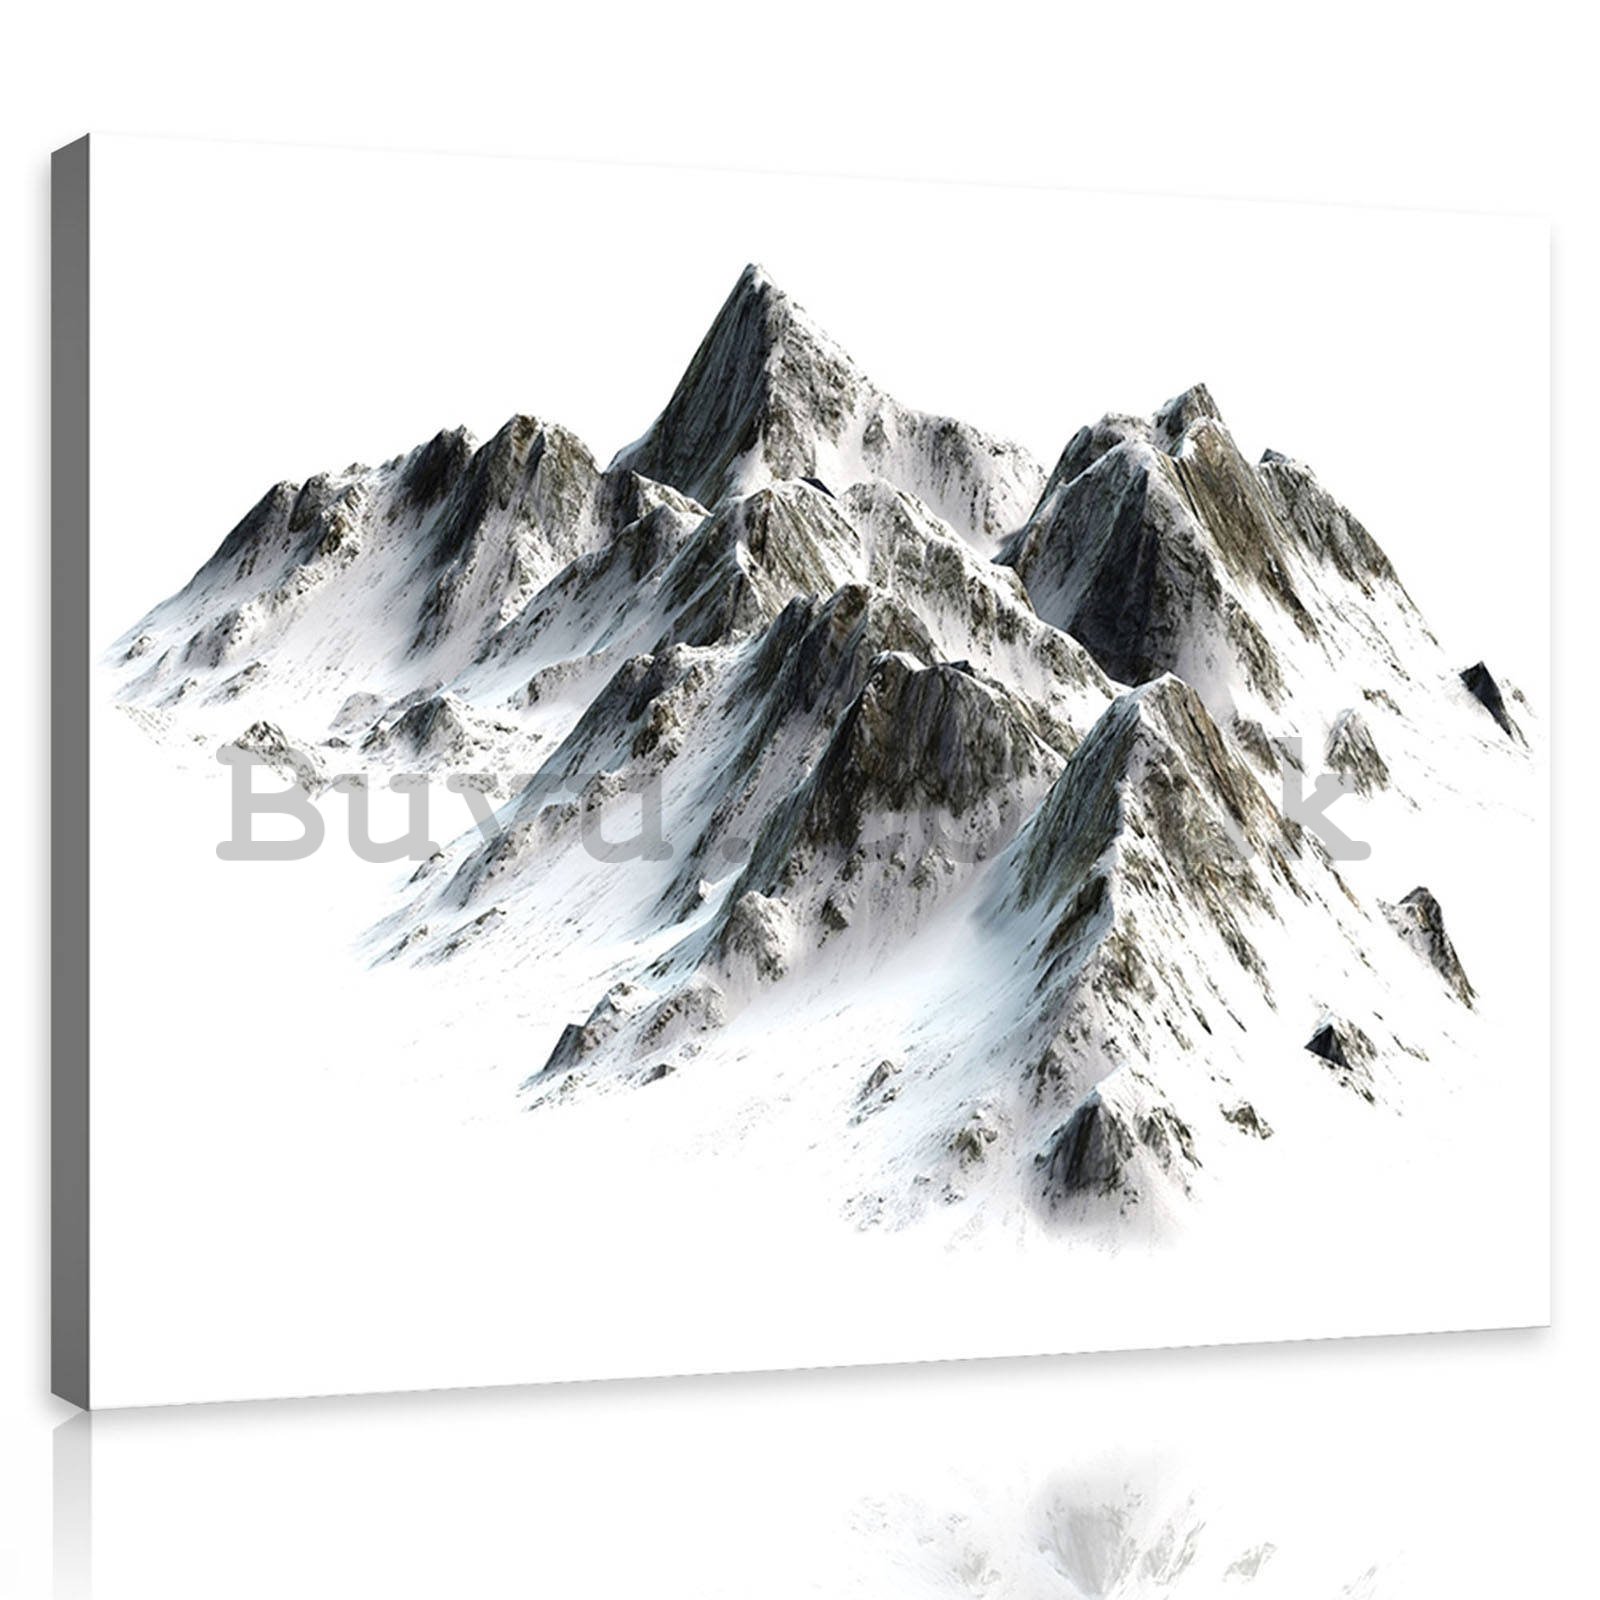 Painting on canvas: Snowy mountains - 80x60 cm